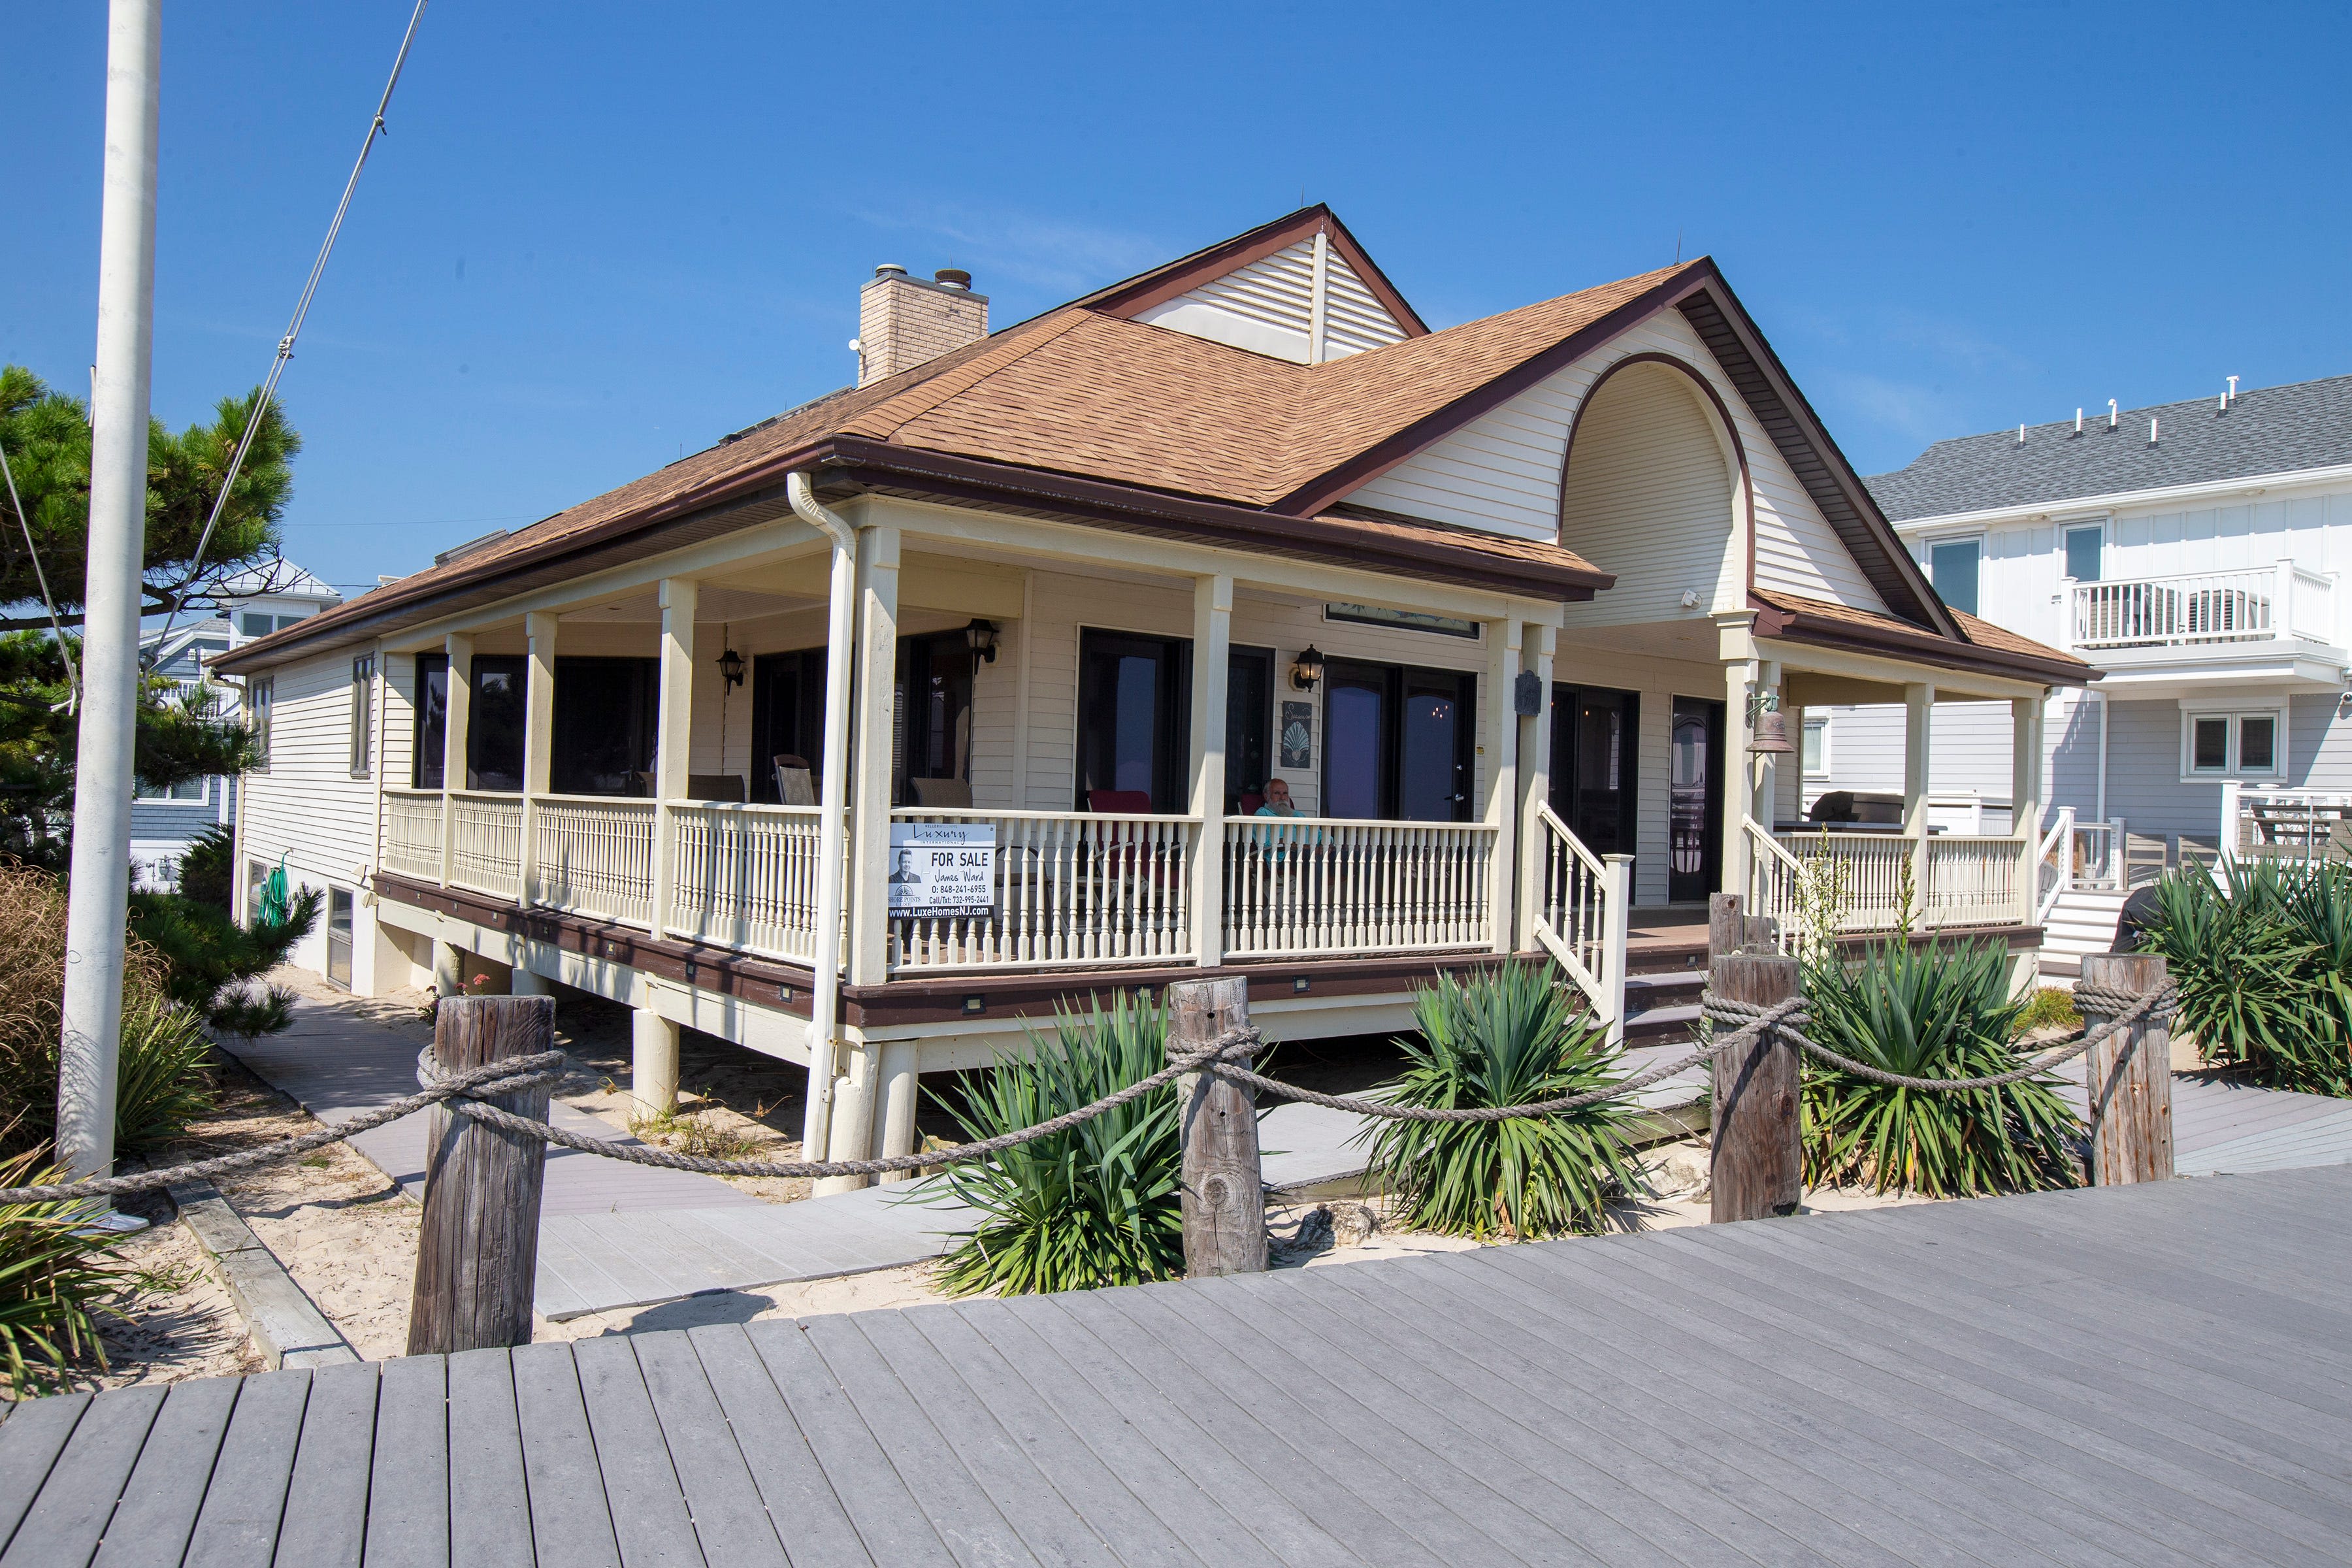 'Sinatra house' in Point Pleasant Beach sells for about half initial asking price